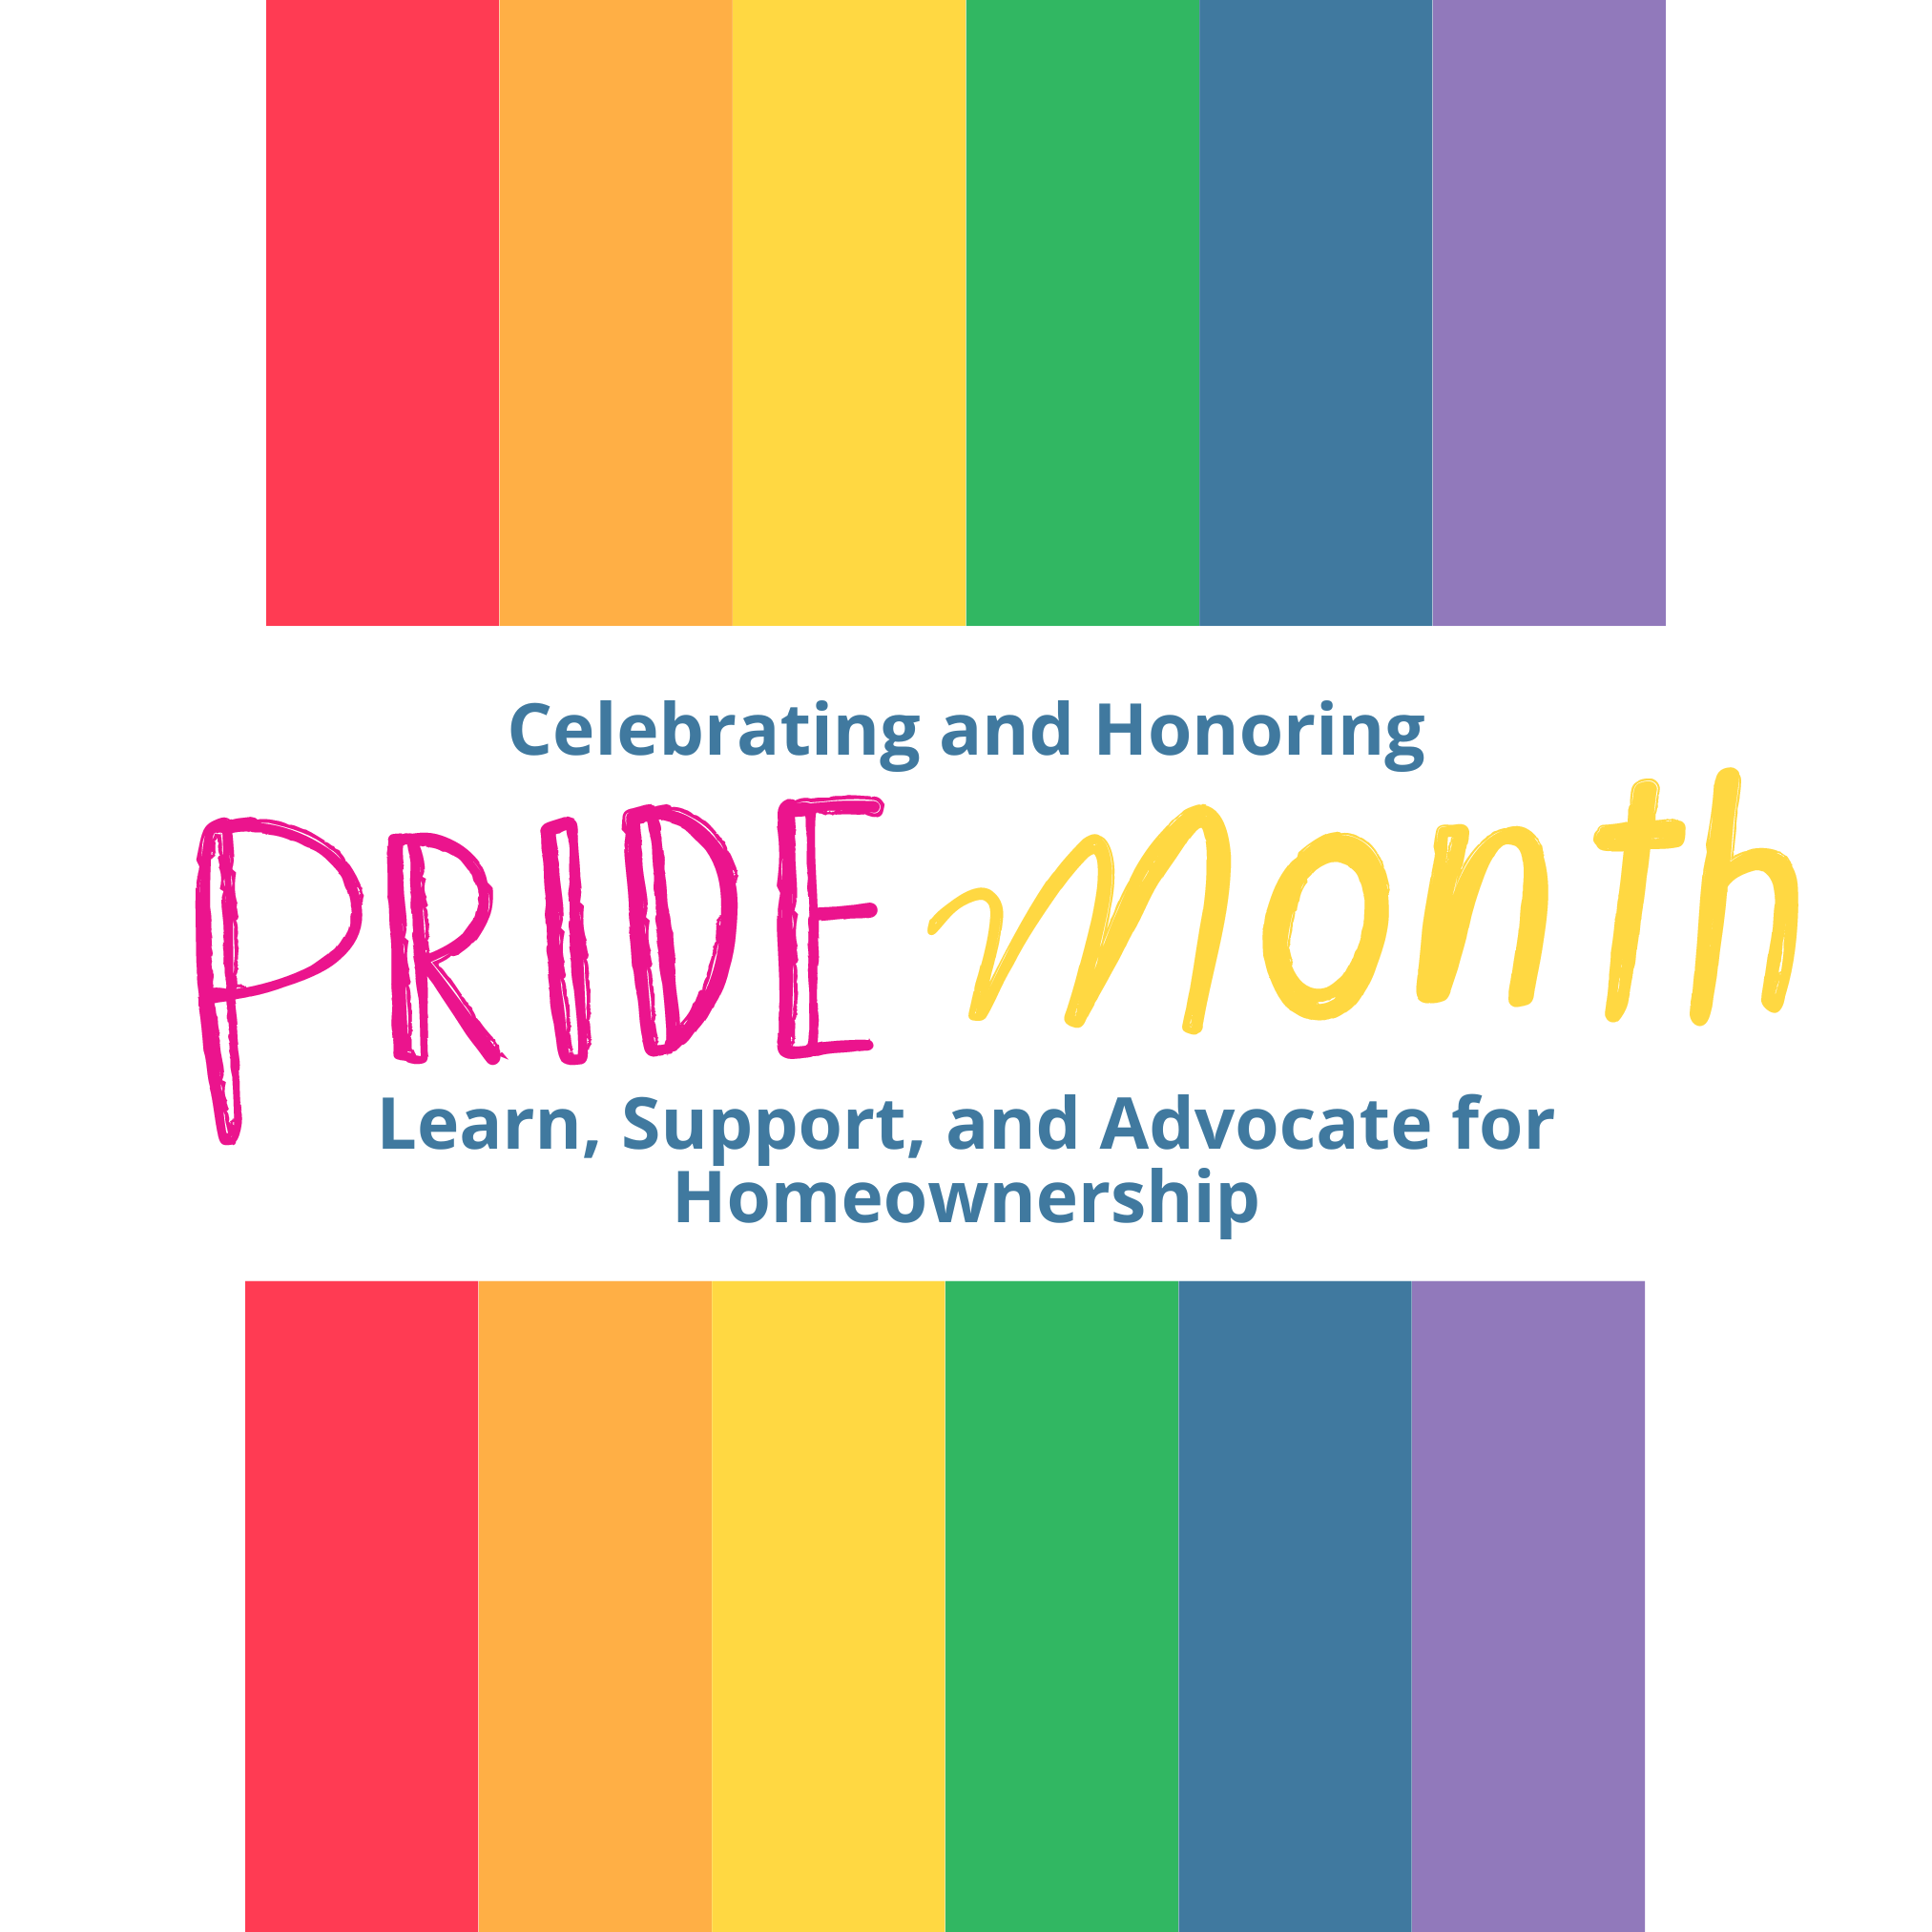 Celebrating and Honoring Pride Month Learn, Support, and Advocate for Homeownership